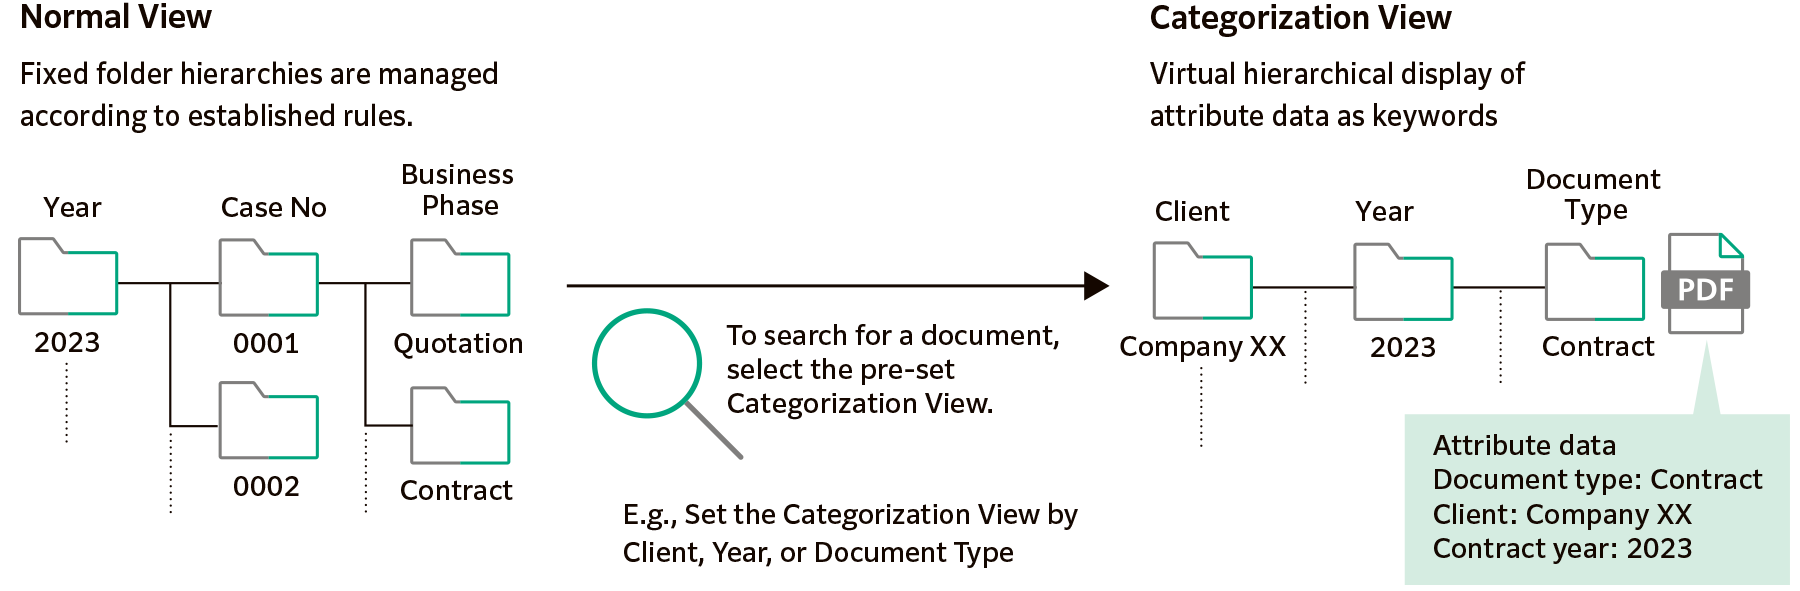 Categorization View Helps to Find Your Document